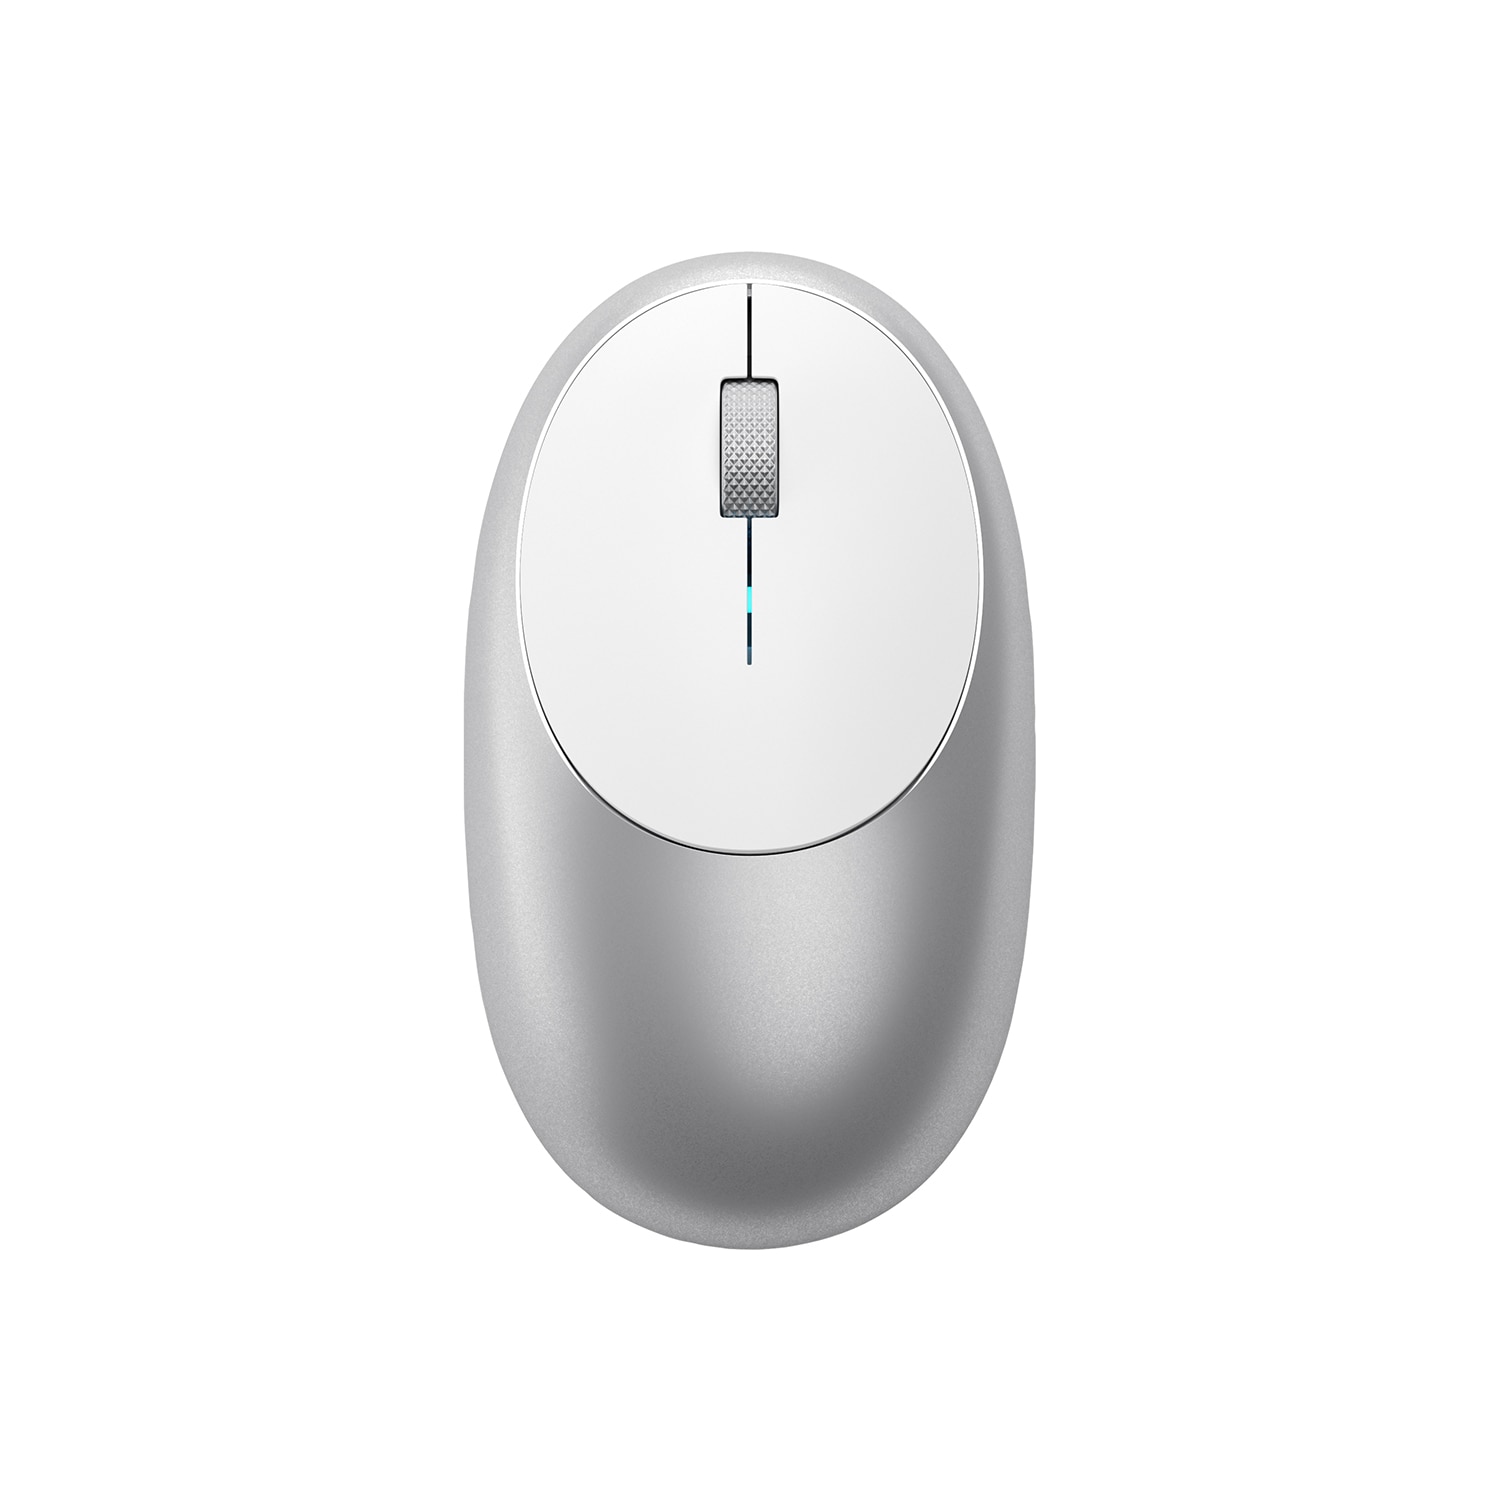 Satechi M1 Wireless Mouse- Silver